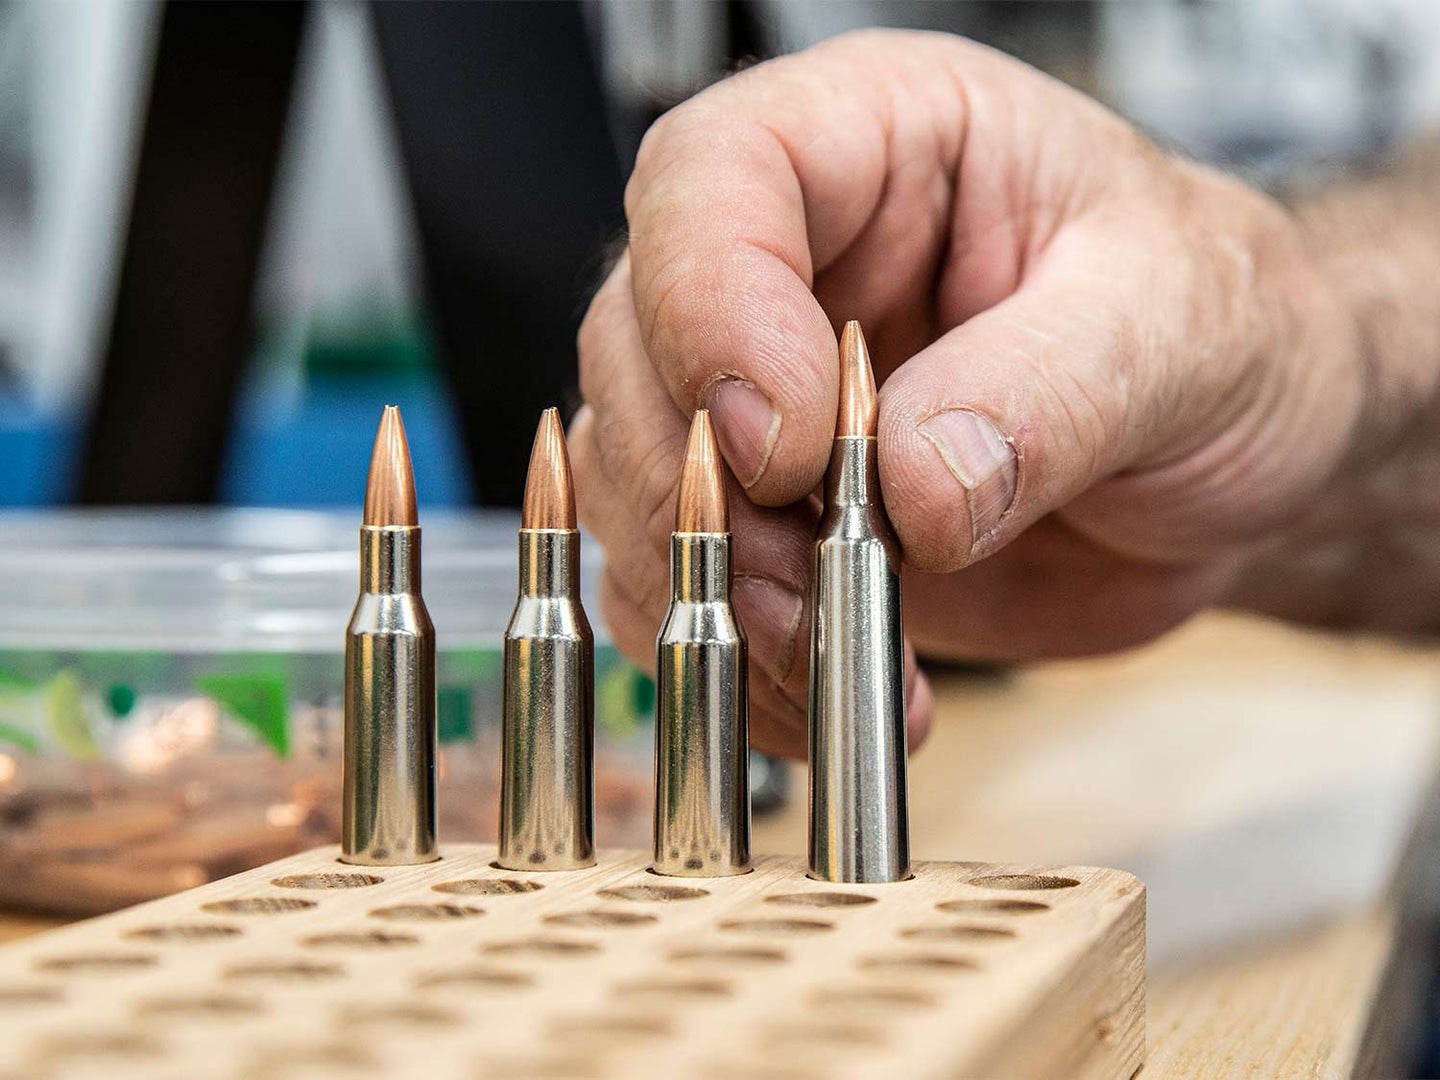 A hand places custom bullets into a wooden plank with holes drilled into it.